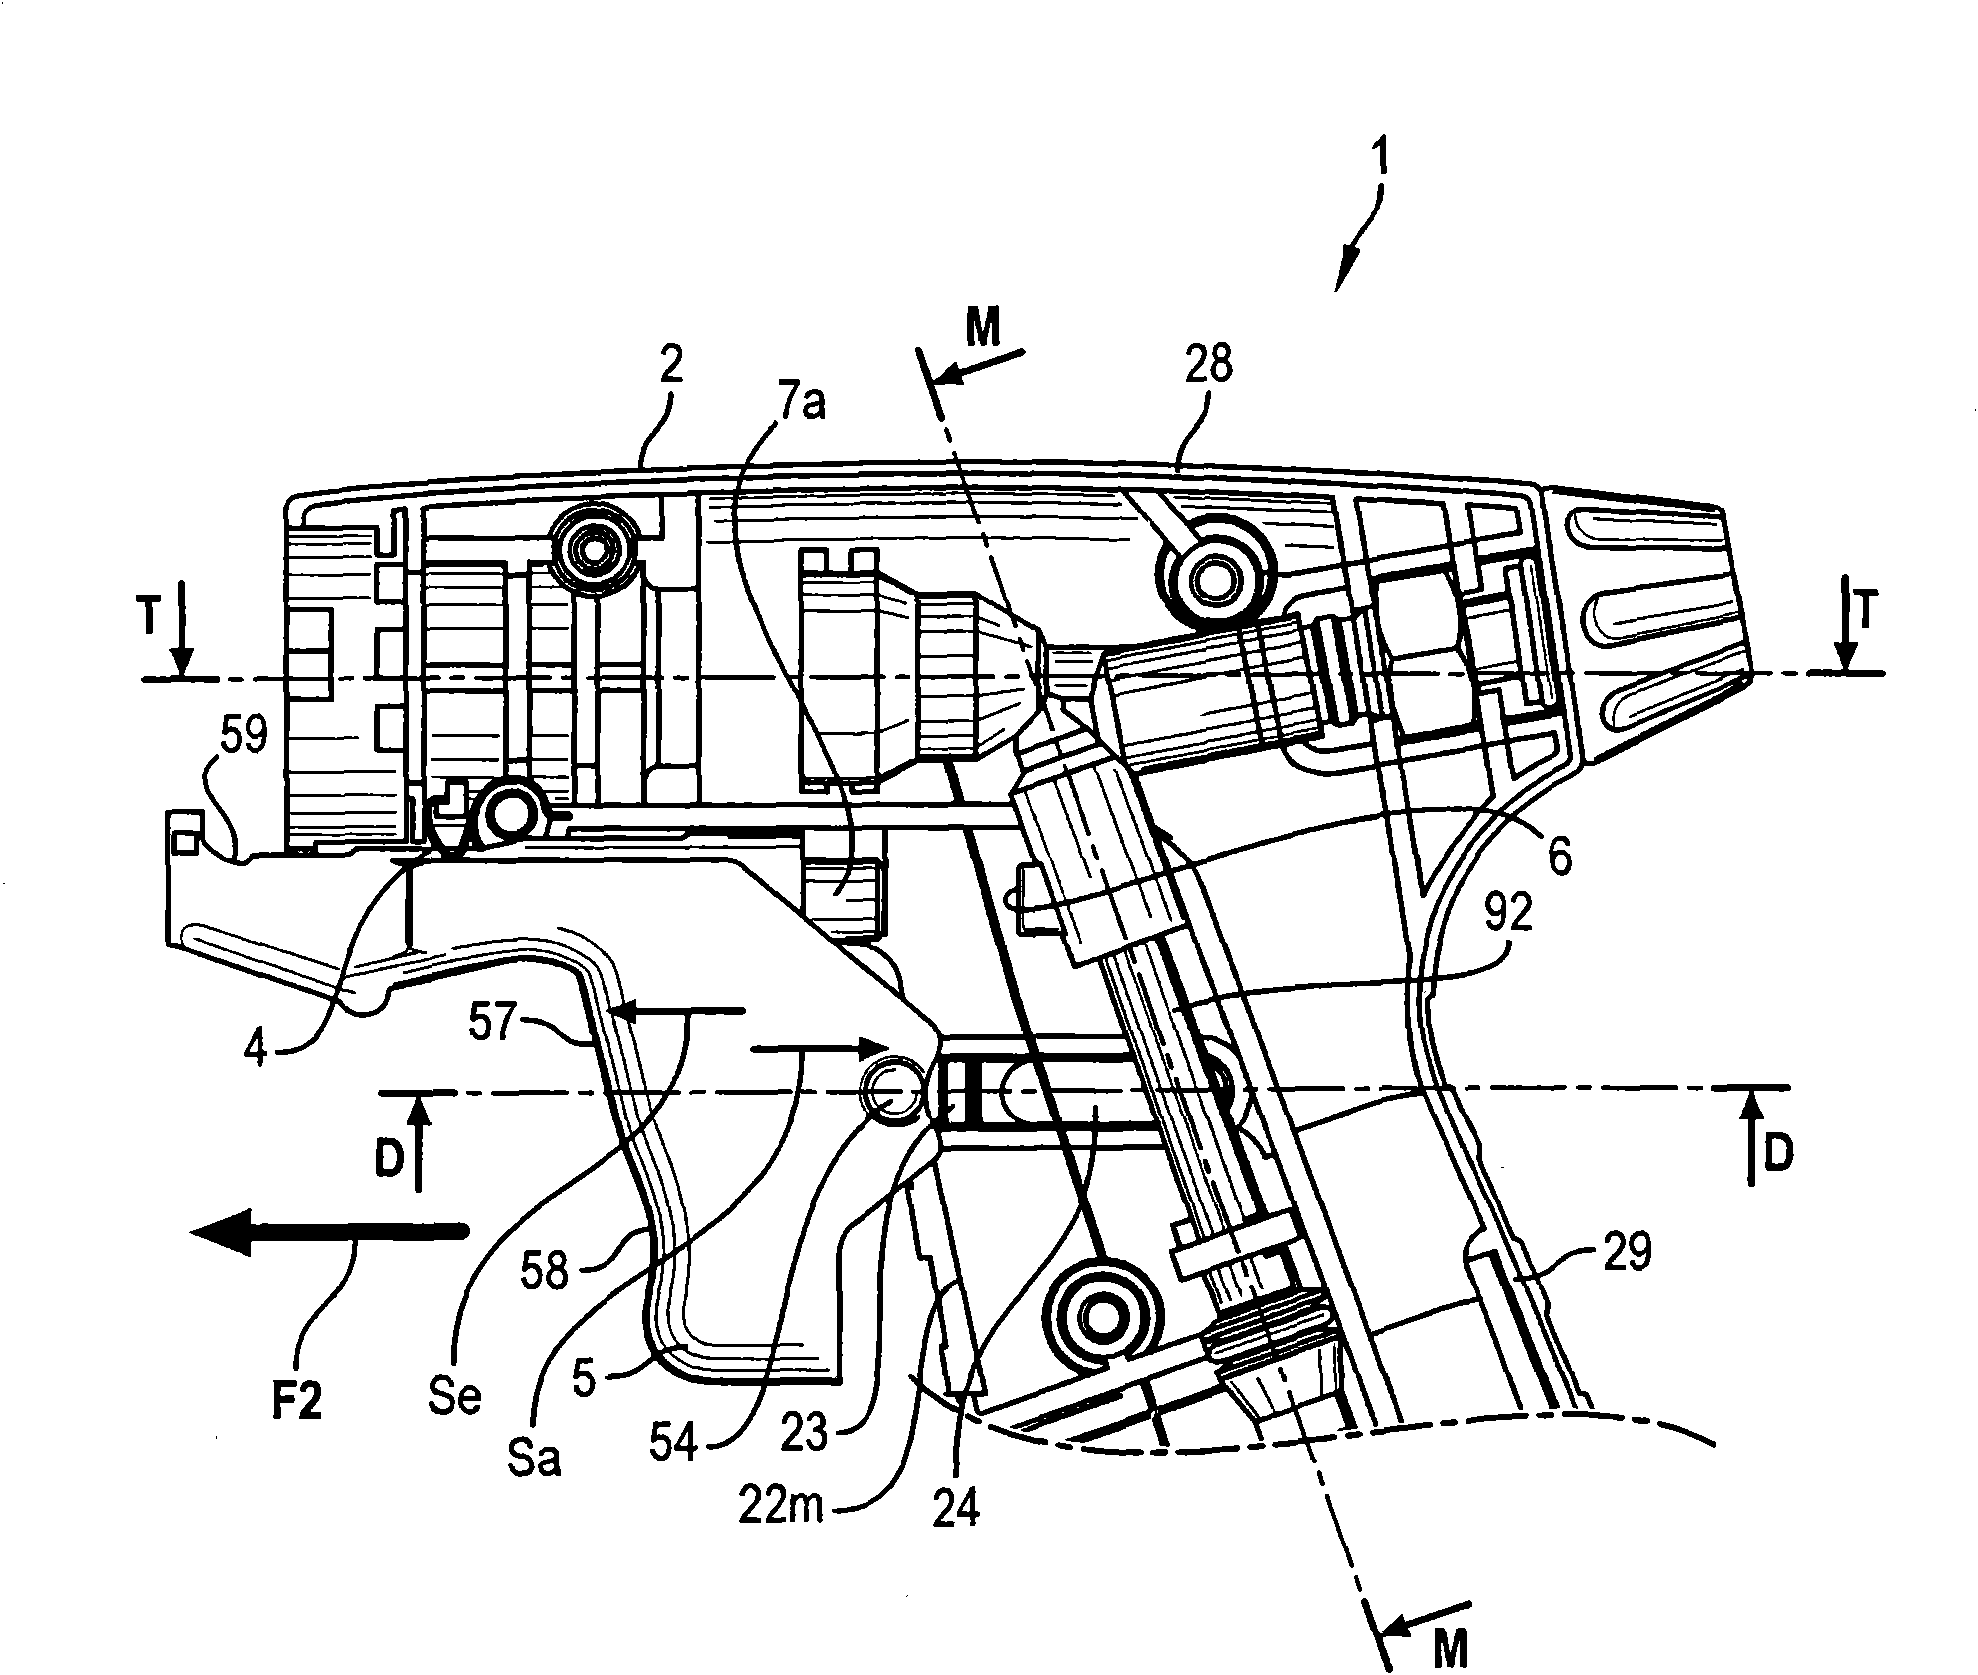 Handtool with incorporated burner